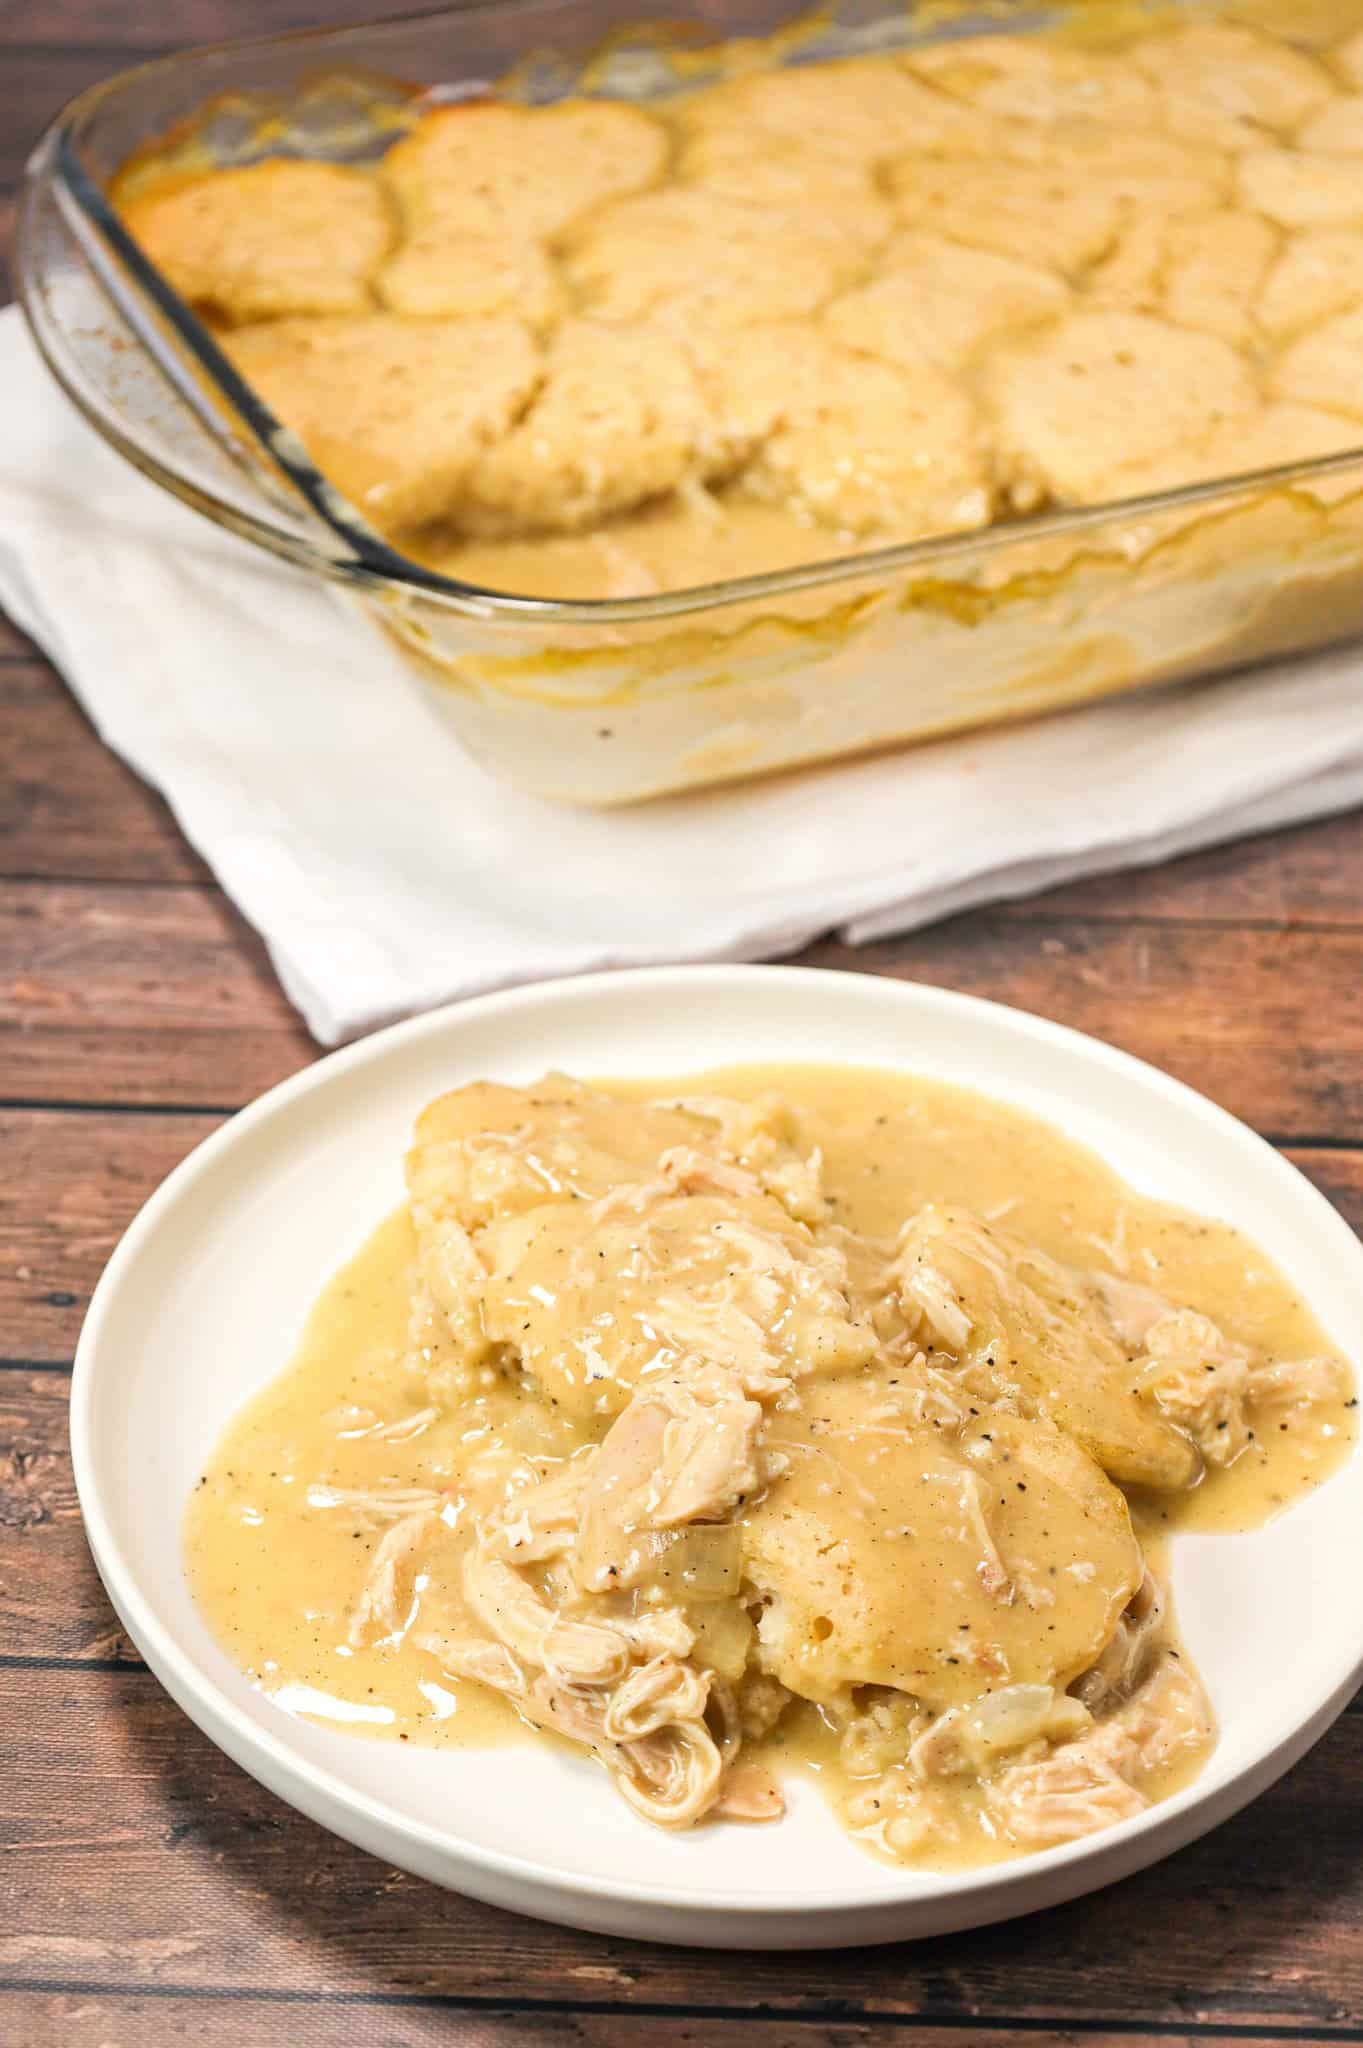 Baked Chicken and Dumplings is an easy dinner recipe using shredded rotisserie chicken, Bisquick, cream of chicken and chicken broth.